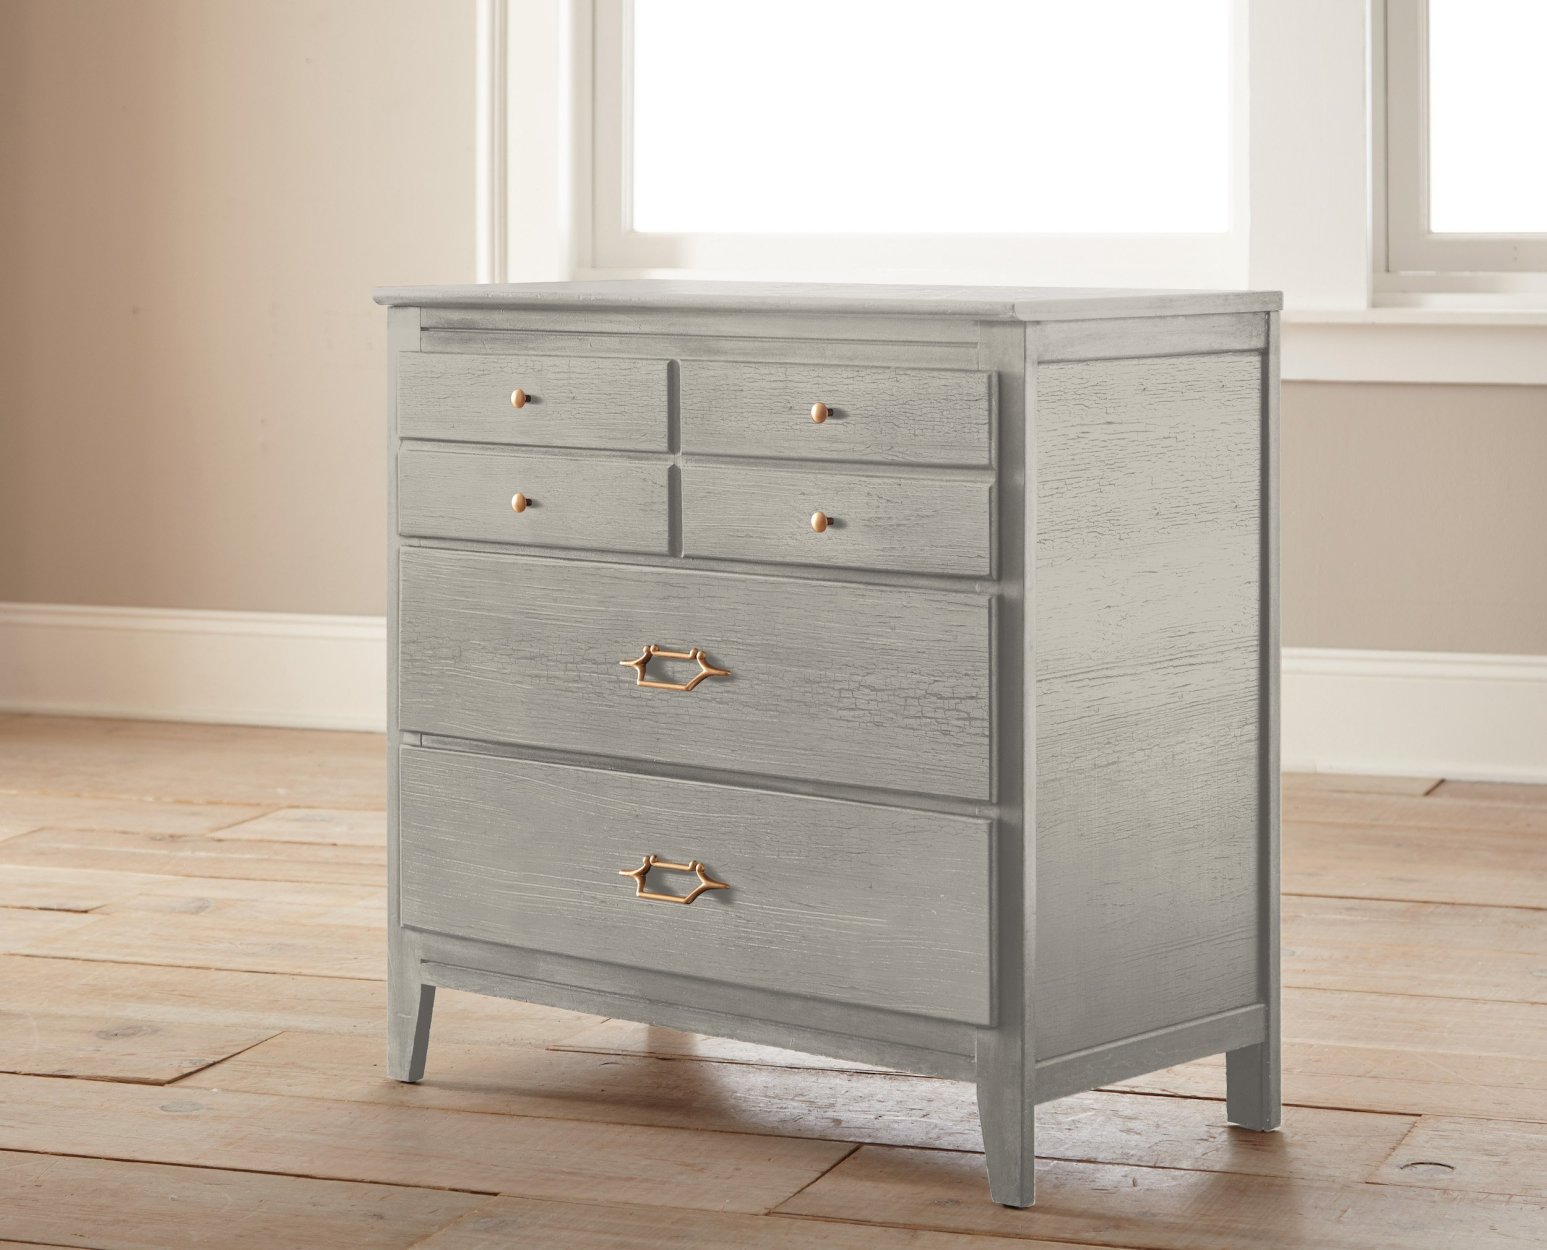 Giverny Chalk Paint Chest Makeover with White Wax - Artsy Chicks Rule®